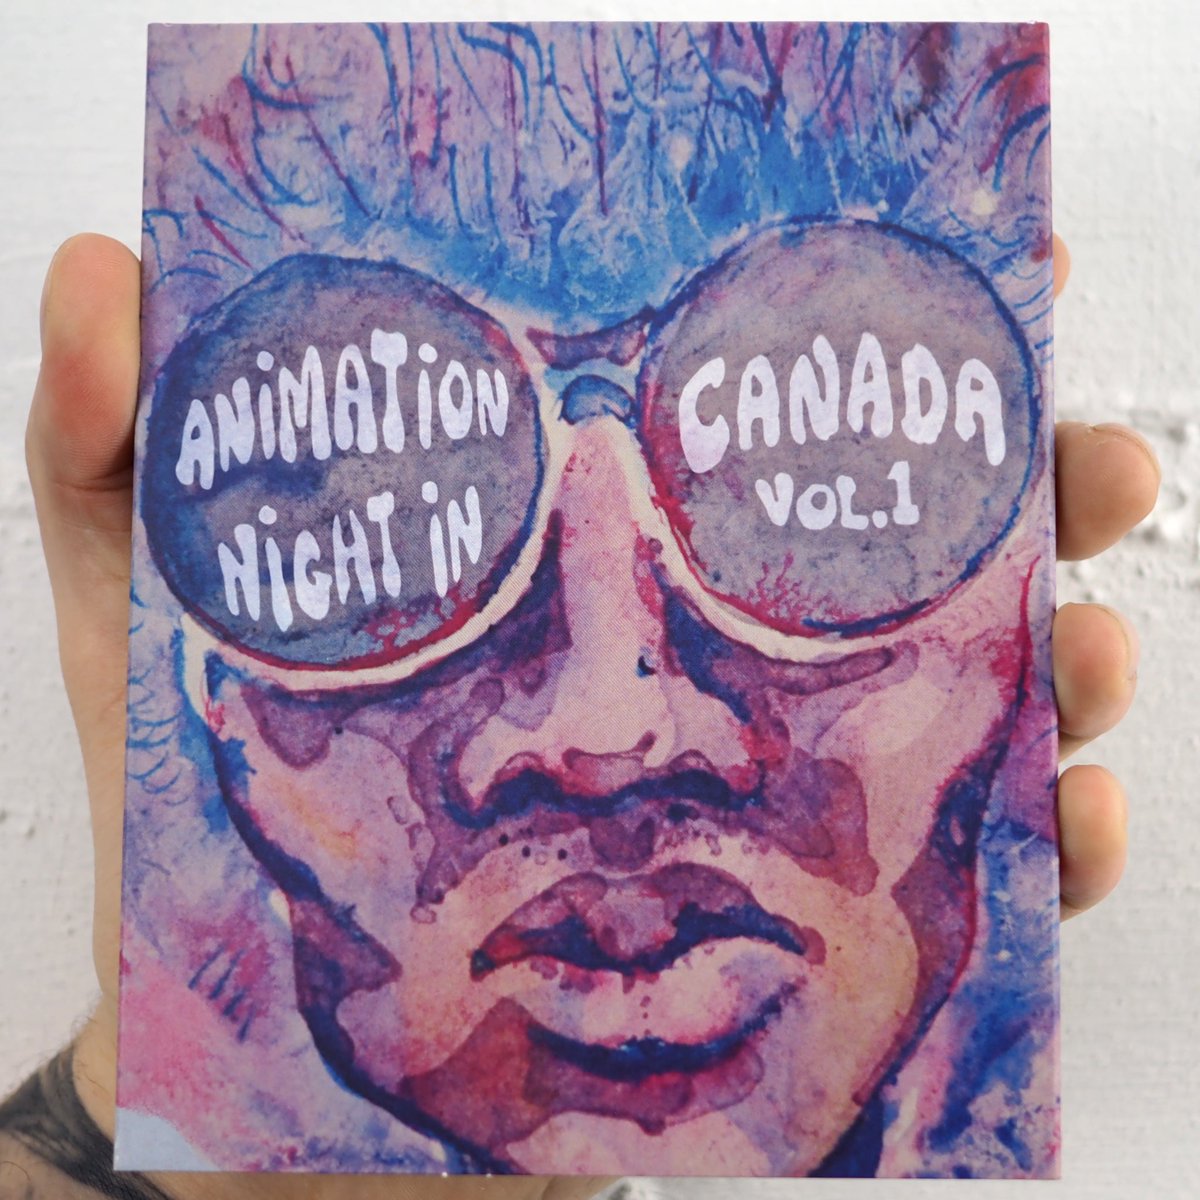 Only 3 copies of the ANMATION NIGHT IN CANADA, VOL. 1 limited edition slipcover remain. If you want one, now's the time: vinegarsyndrome.com/collections/ca…